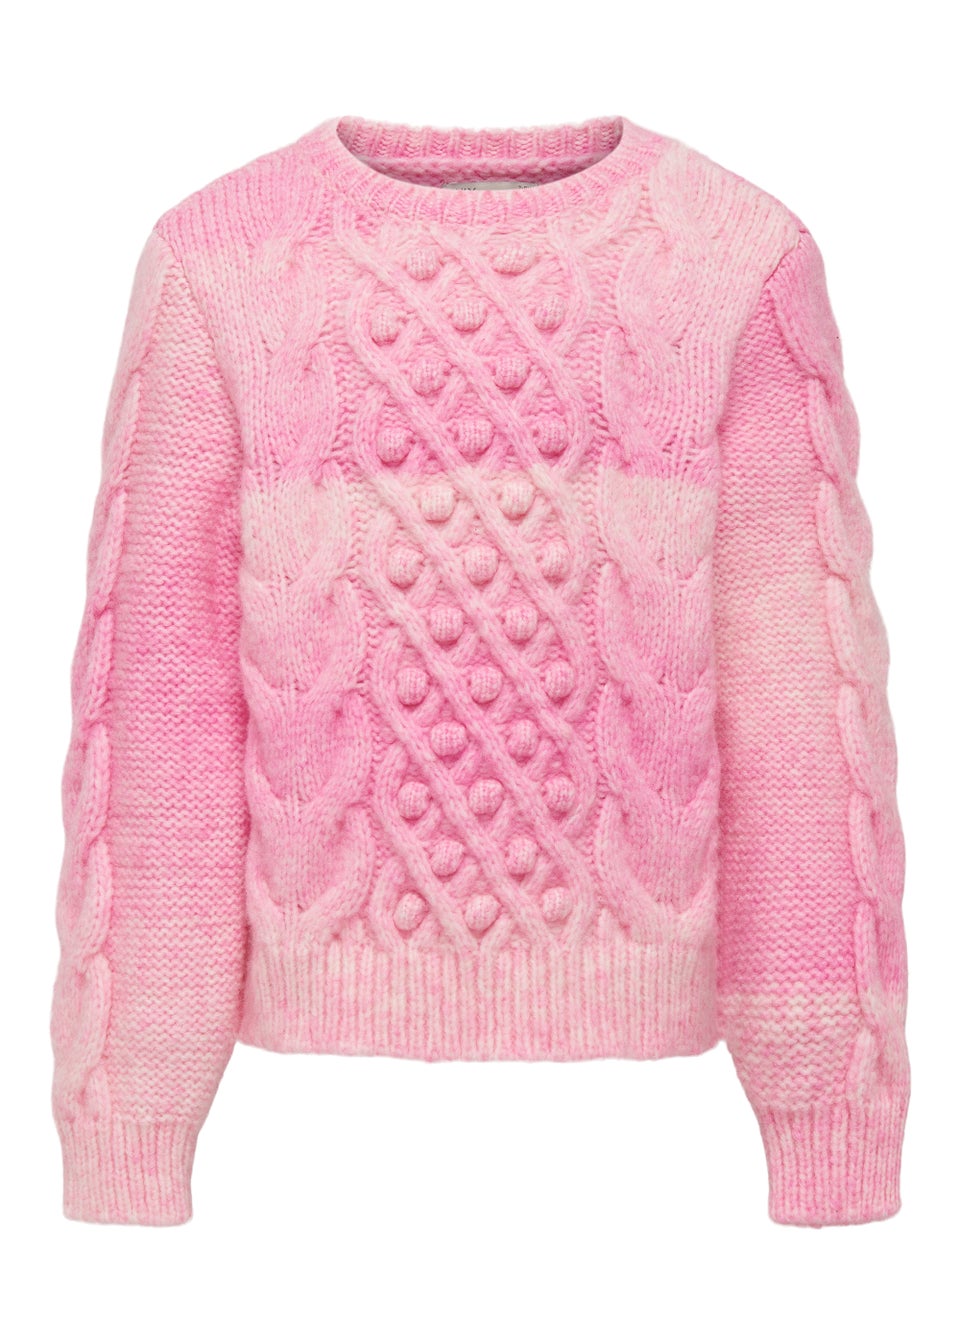 ONLY Kids Pink Cable Knit Long Sleeve Jumper (5-14yrs)